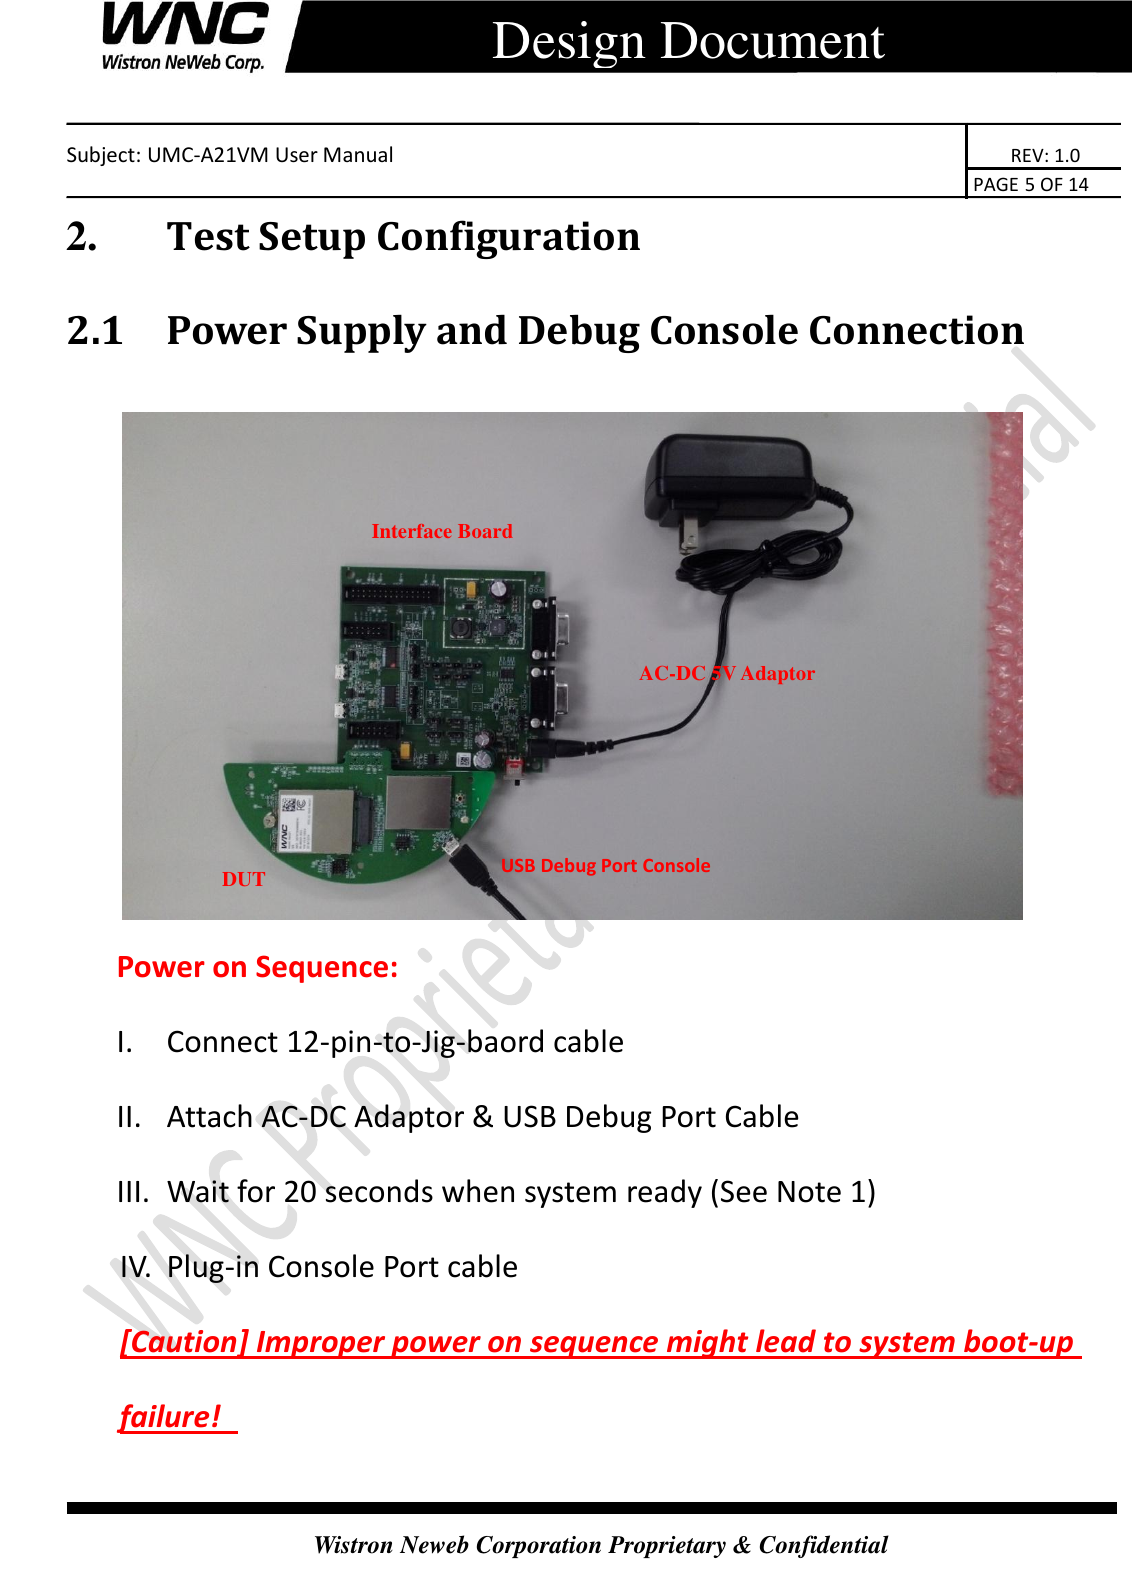    Subject: UMC-A21VM User Manual                                                                      REV: 1.0                                                                                        PAGE 5 OF 14  Wistron Neweb Corporation Proprietary &amp; Confidential      Design Document 2.       Test Setup Configuration 2.1 Power Supply and Debug Console Connection   Power on Sequence: I.  Connect 12-pin-to-Jig-baord cable II.  Attach AC-DC Adaptor &amp; USB Debug Port Cable III.  Wait for 20 seconds when system ready (See Note 1) IV.  Plug-in Console Port cable   [Caution] Improper power on sequence might lead to system boot-up failure!   USB Debug Port Console Interface Board   AC-DC 5V Adaptor DUT (CB) 